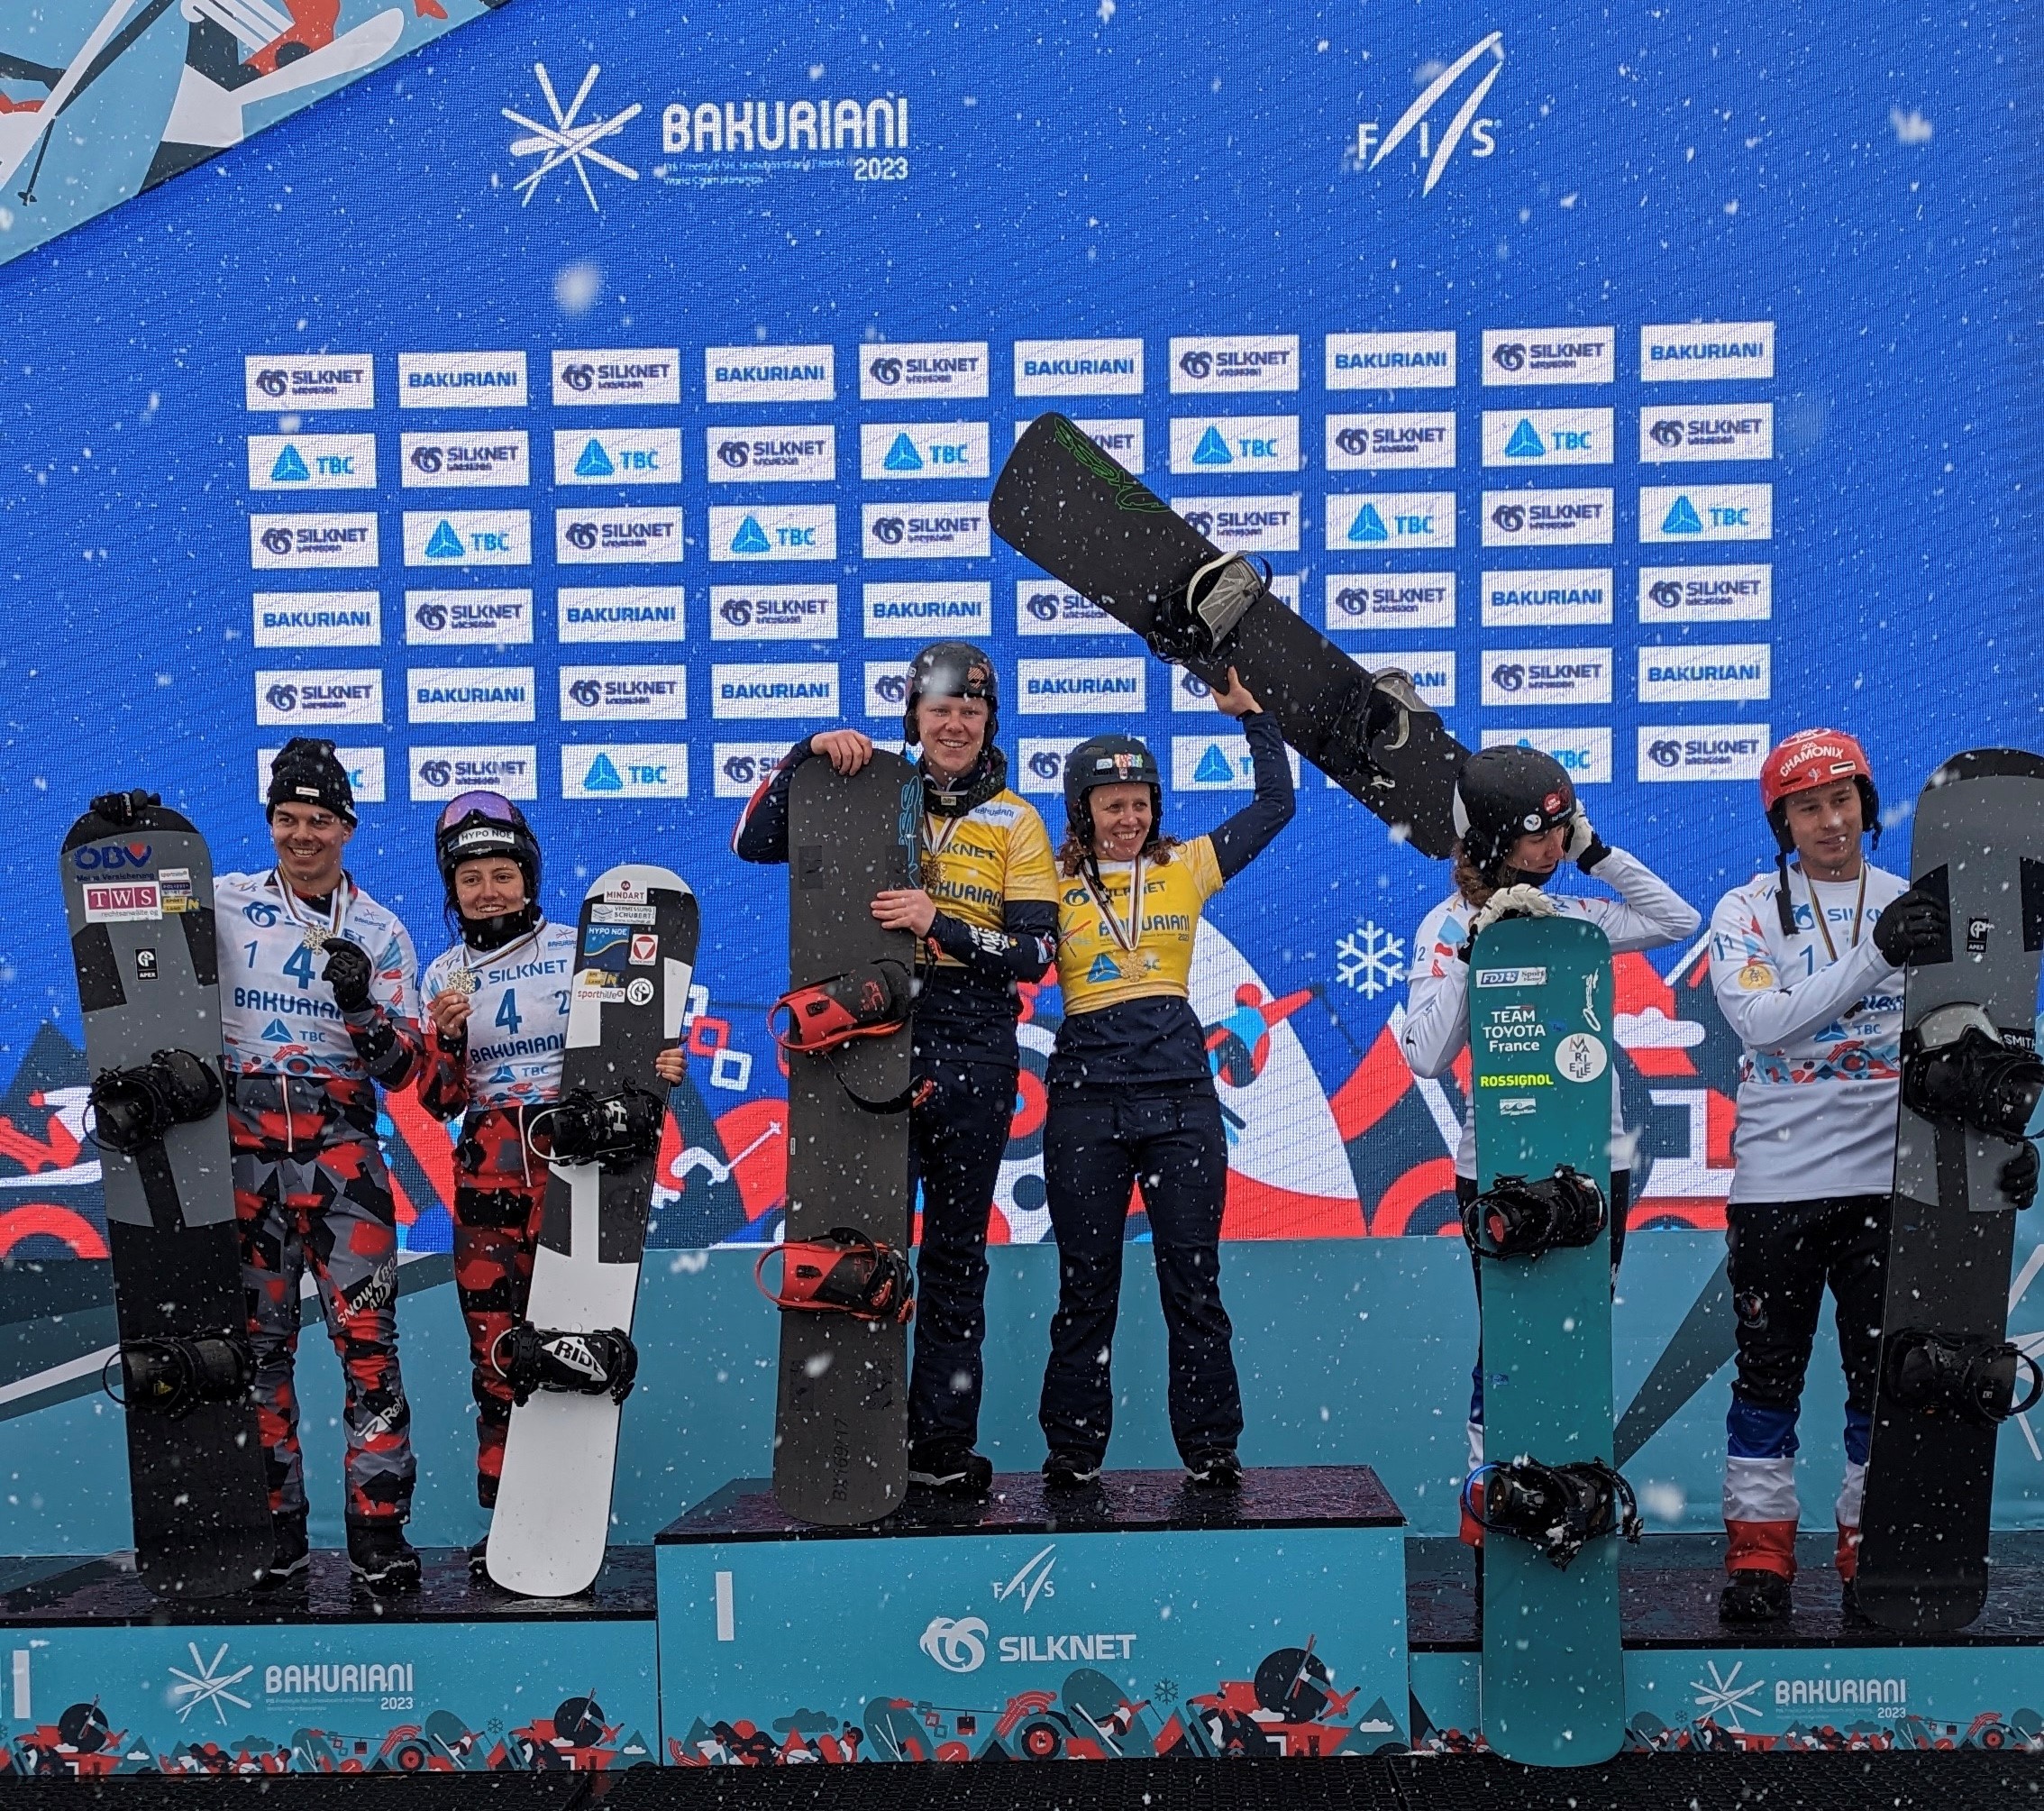 Charlotte Bankes and Huw Nightingale take SBX Team World Championships title